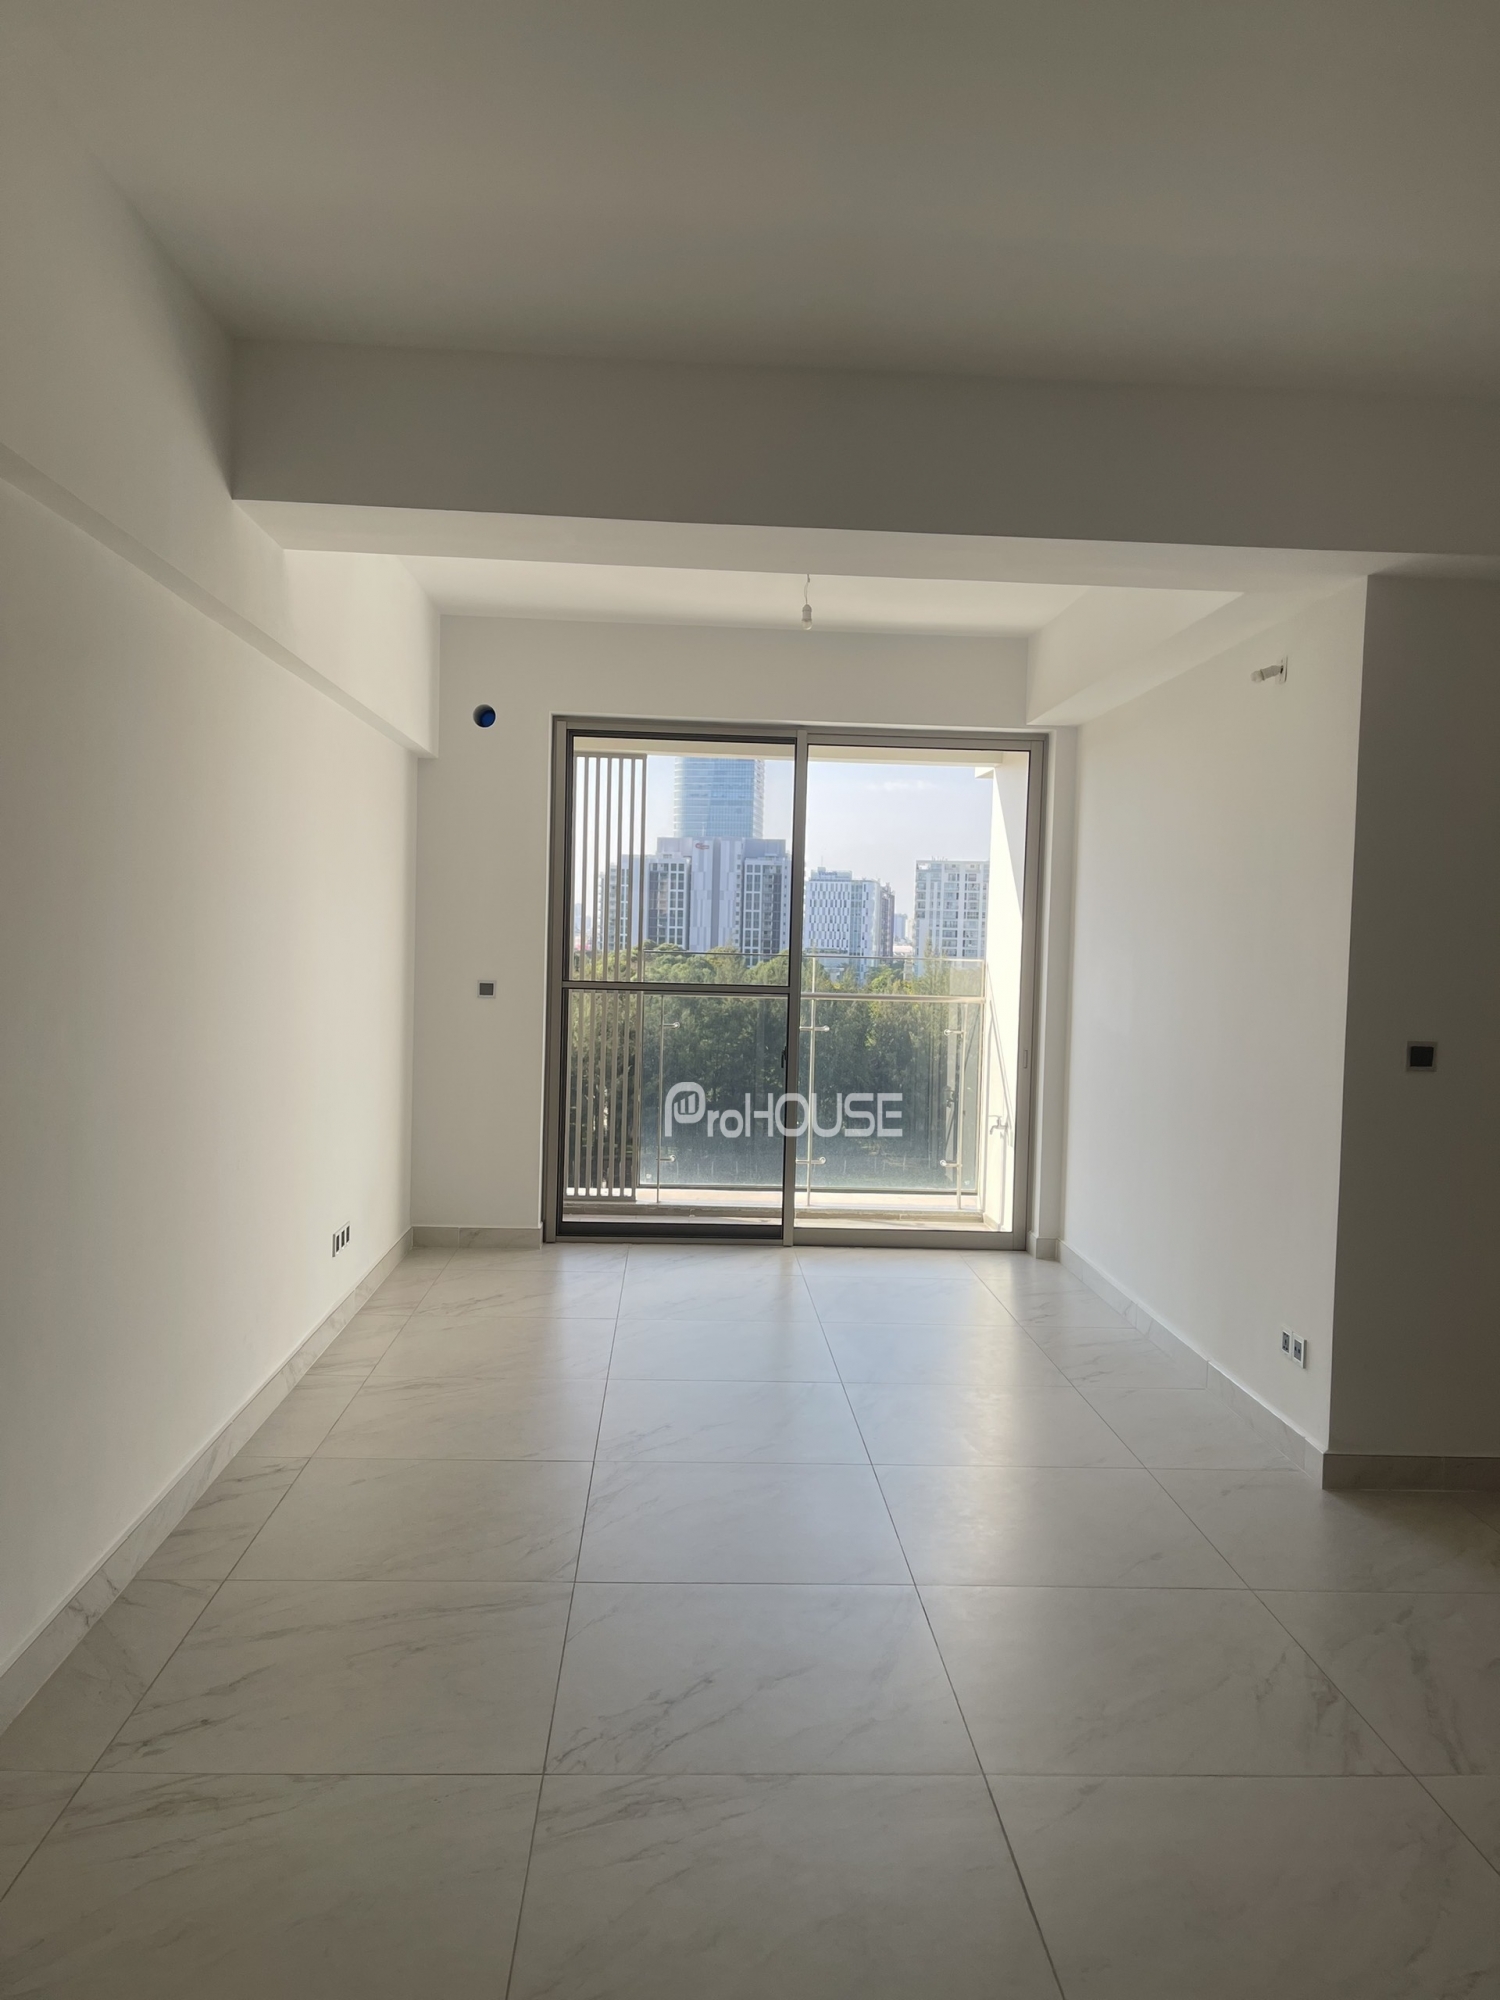 Unfurnished 3-bedroom apartment for sale in Midtown Phu My Hung with open view